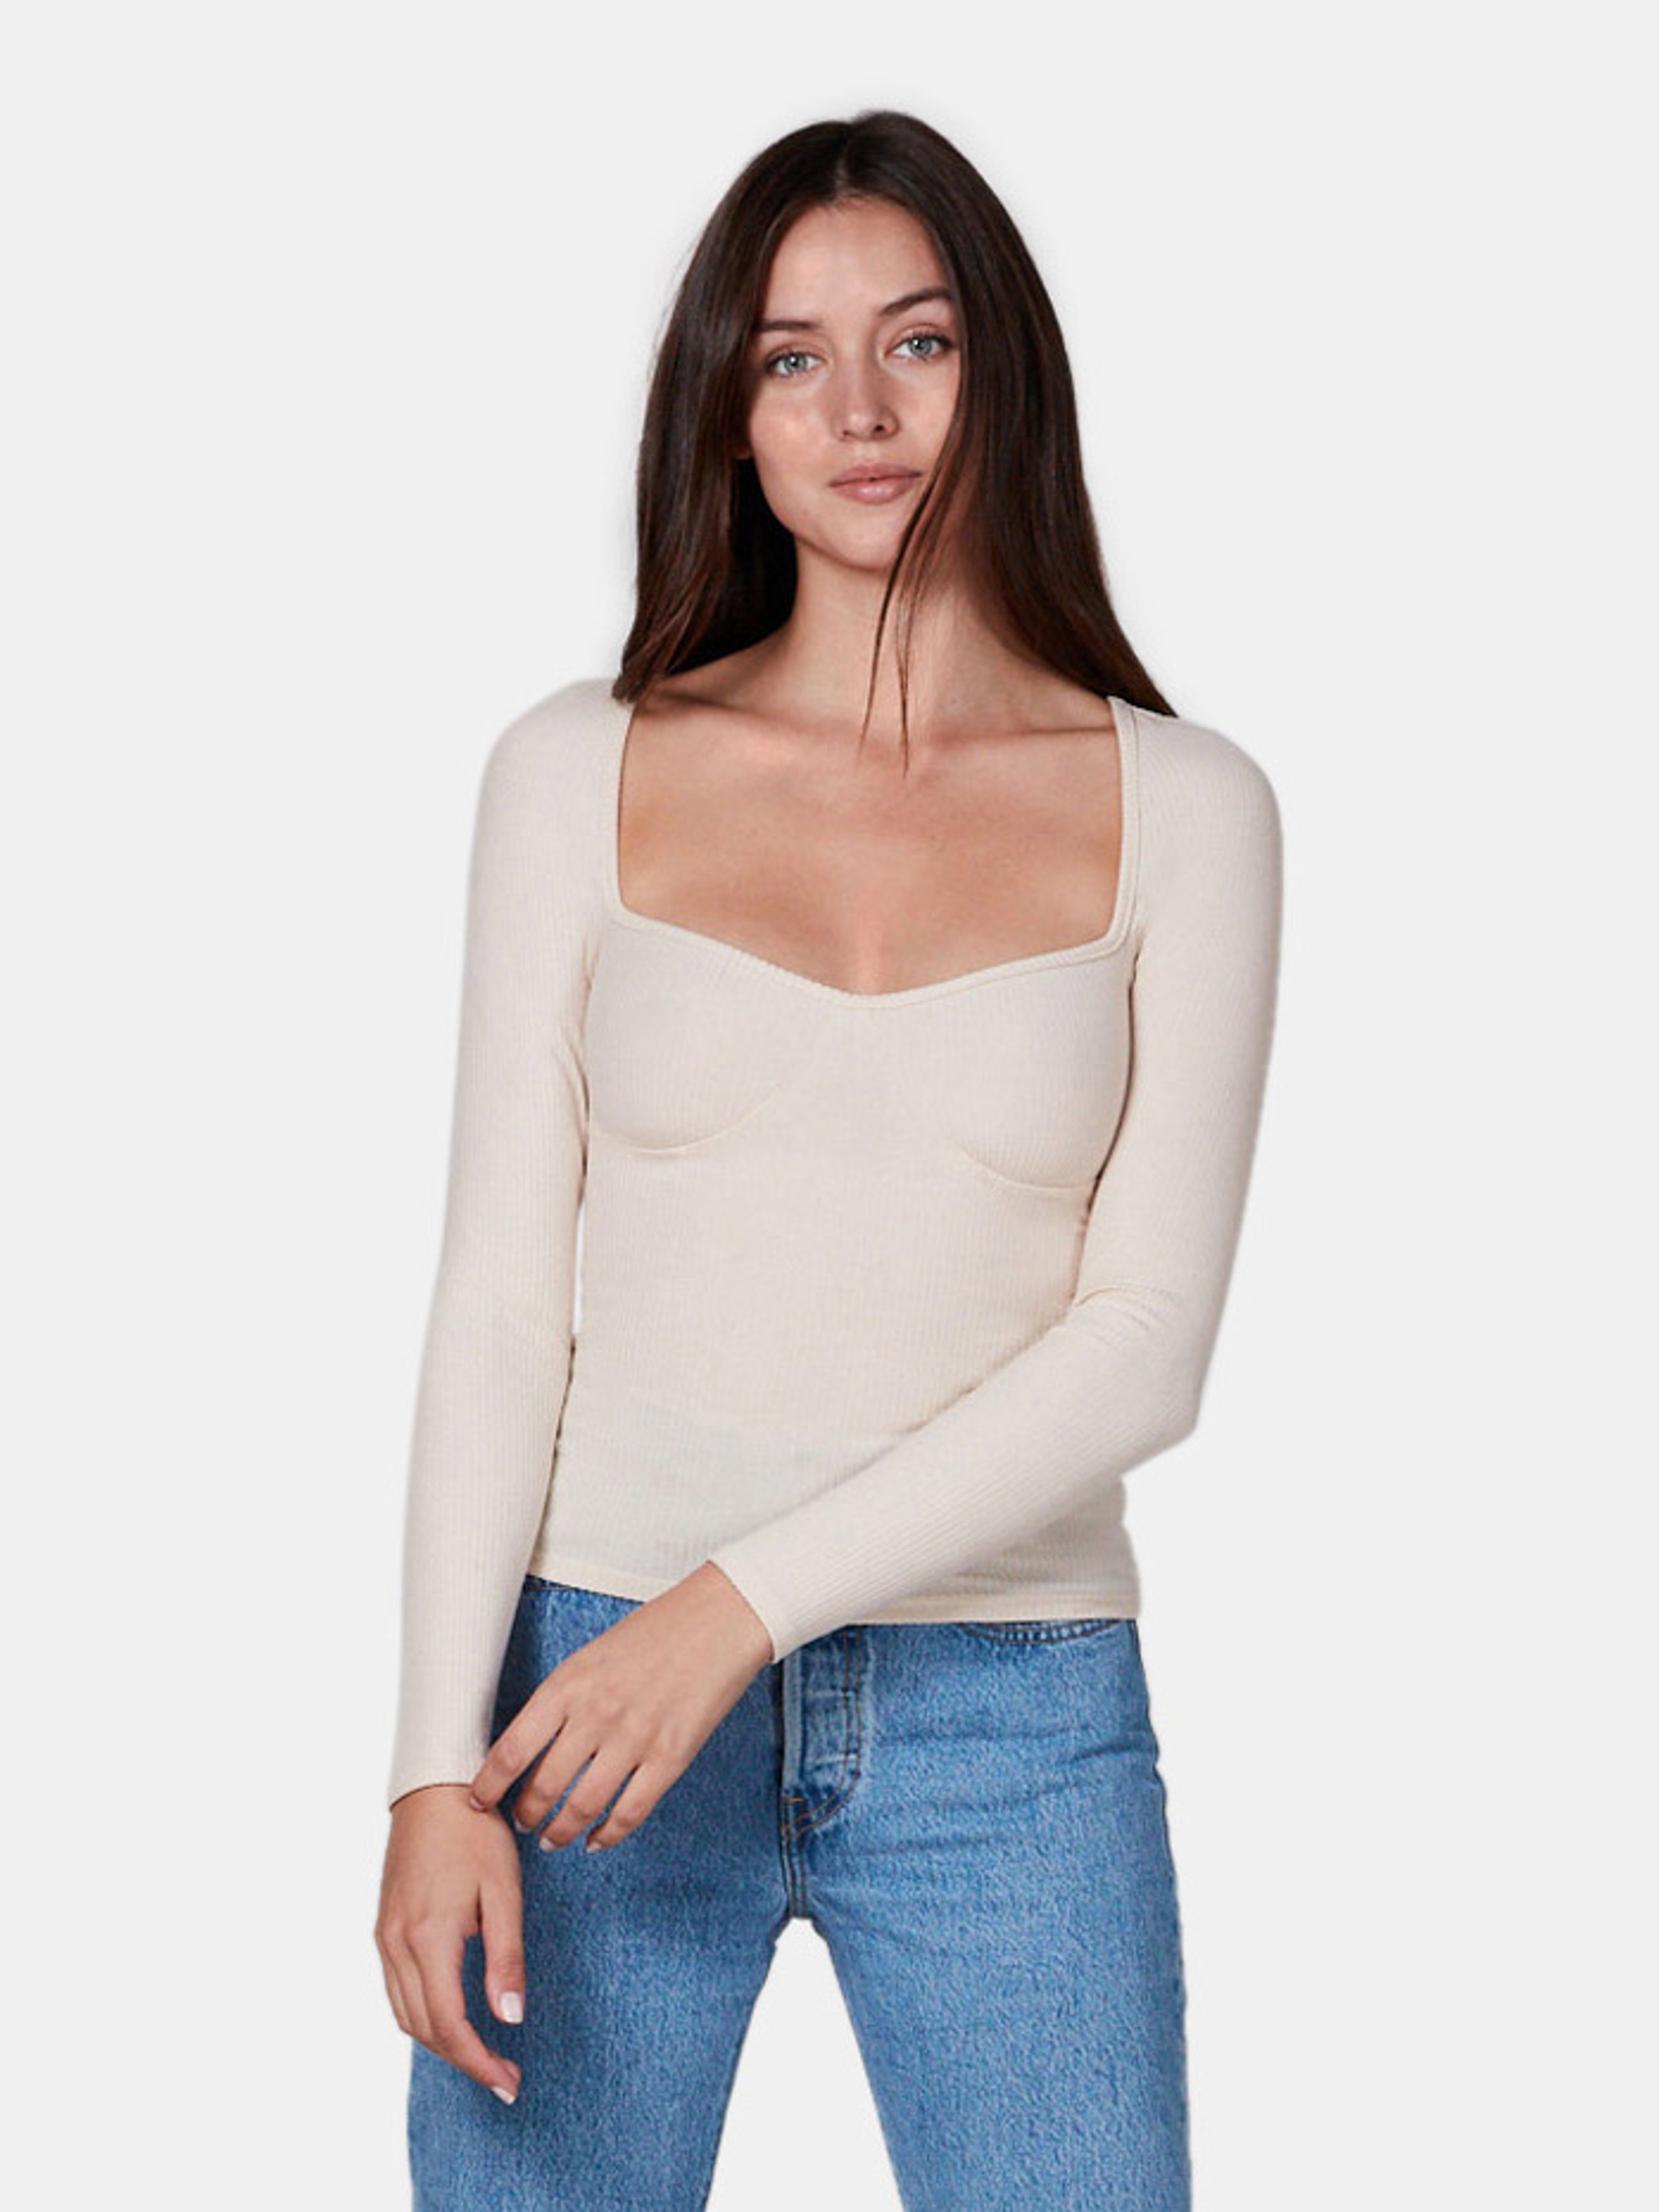 Billie The Label Irina Top In Ivory